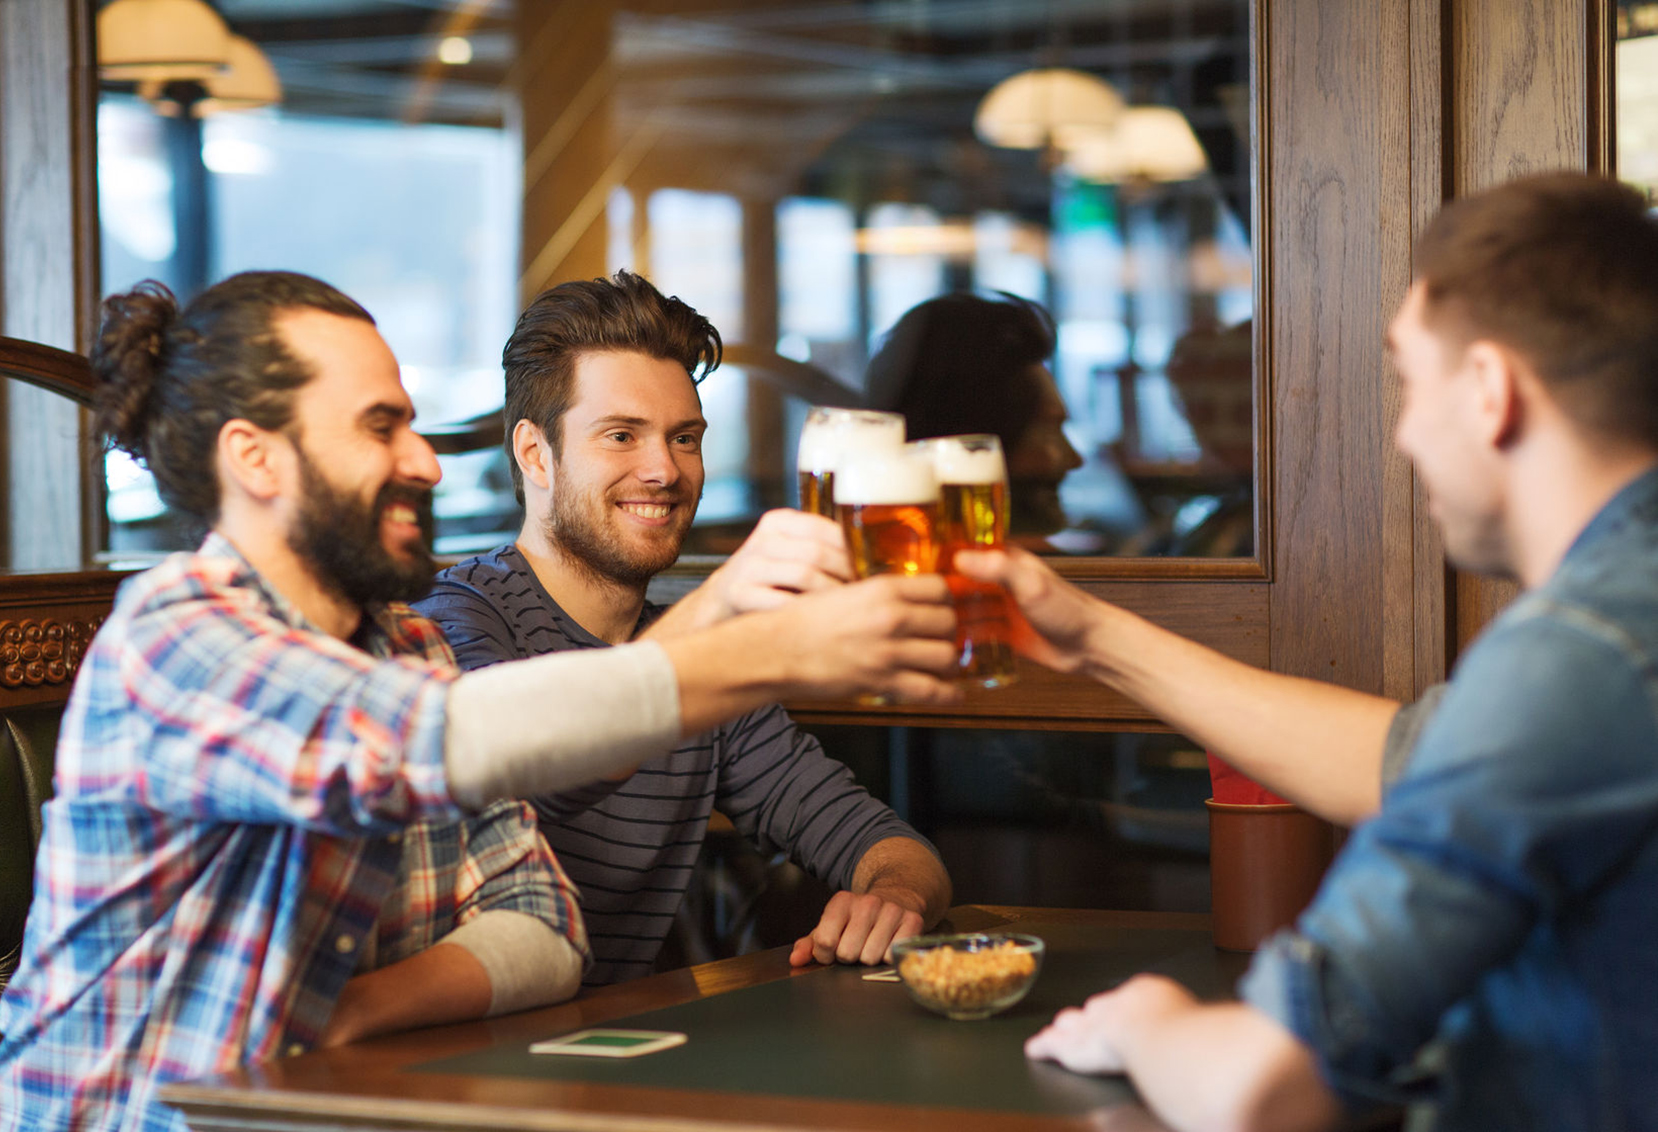 47511000 - People, Men, Leisure, Friendship And Celebration Concept - Happy Male Friends Drinking Beer And Clinking Glasses At Bar Or Pub